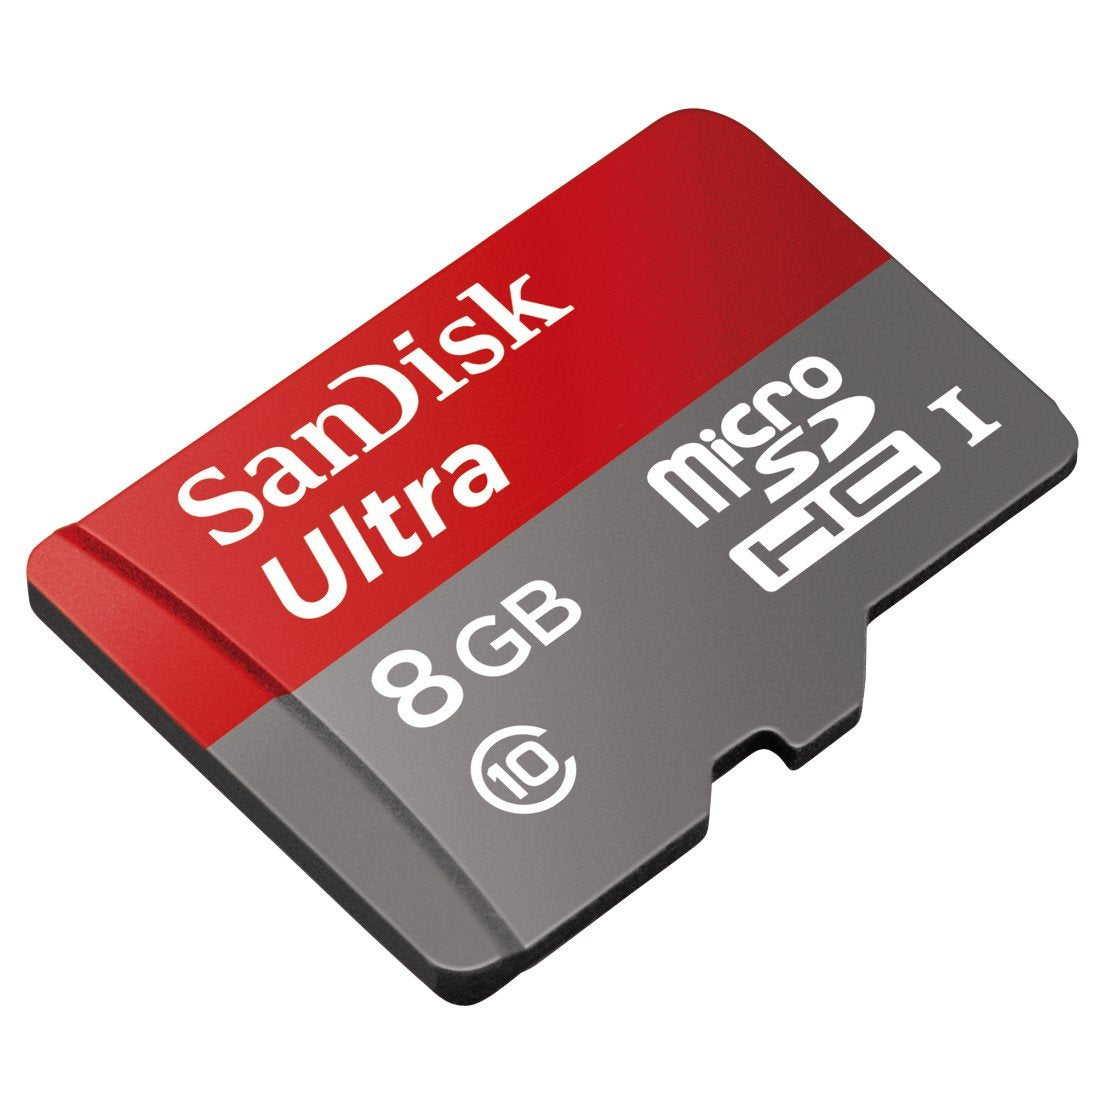 SanDisk Ultra 8GB Class 10 UHS-I MicroSDHC Memory Card with Adapter, Grey / Red, Standard Packaging (SDSDQUAN-008G-G4A)